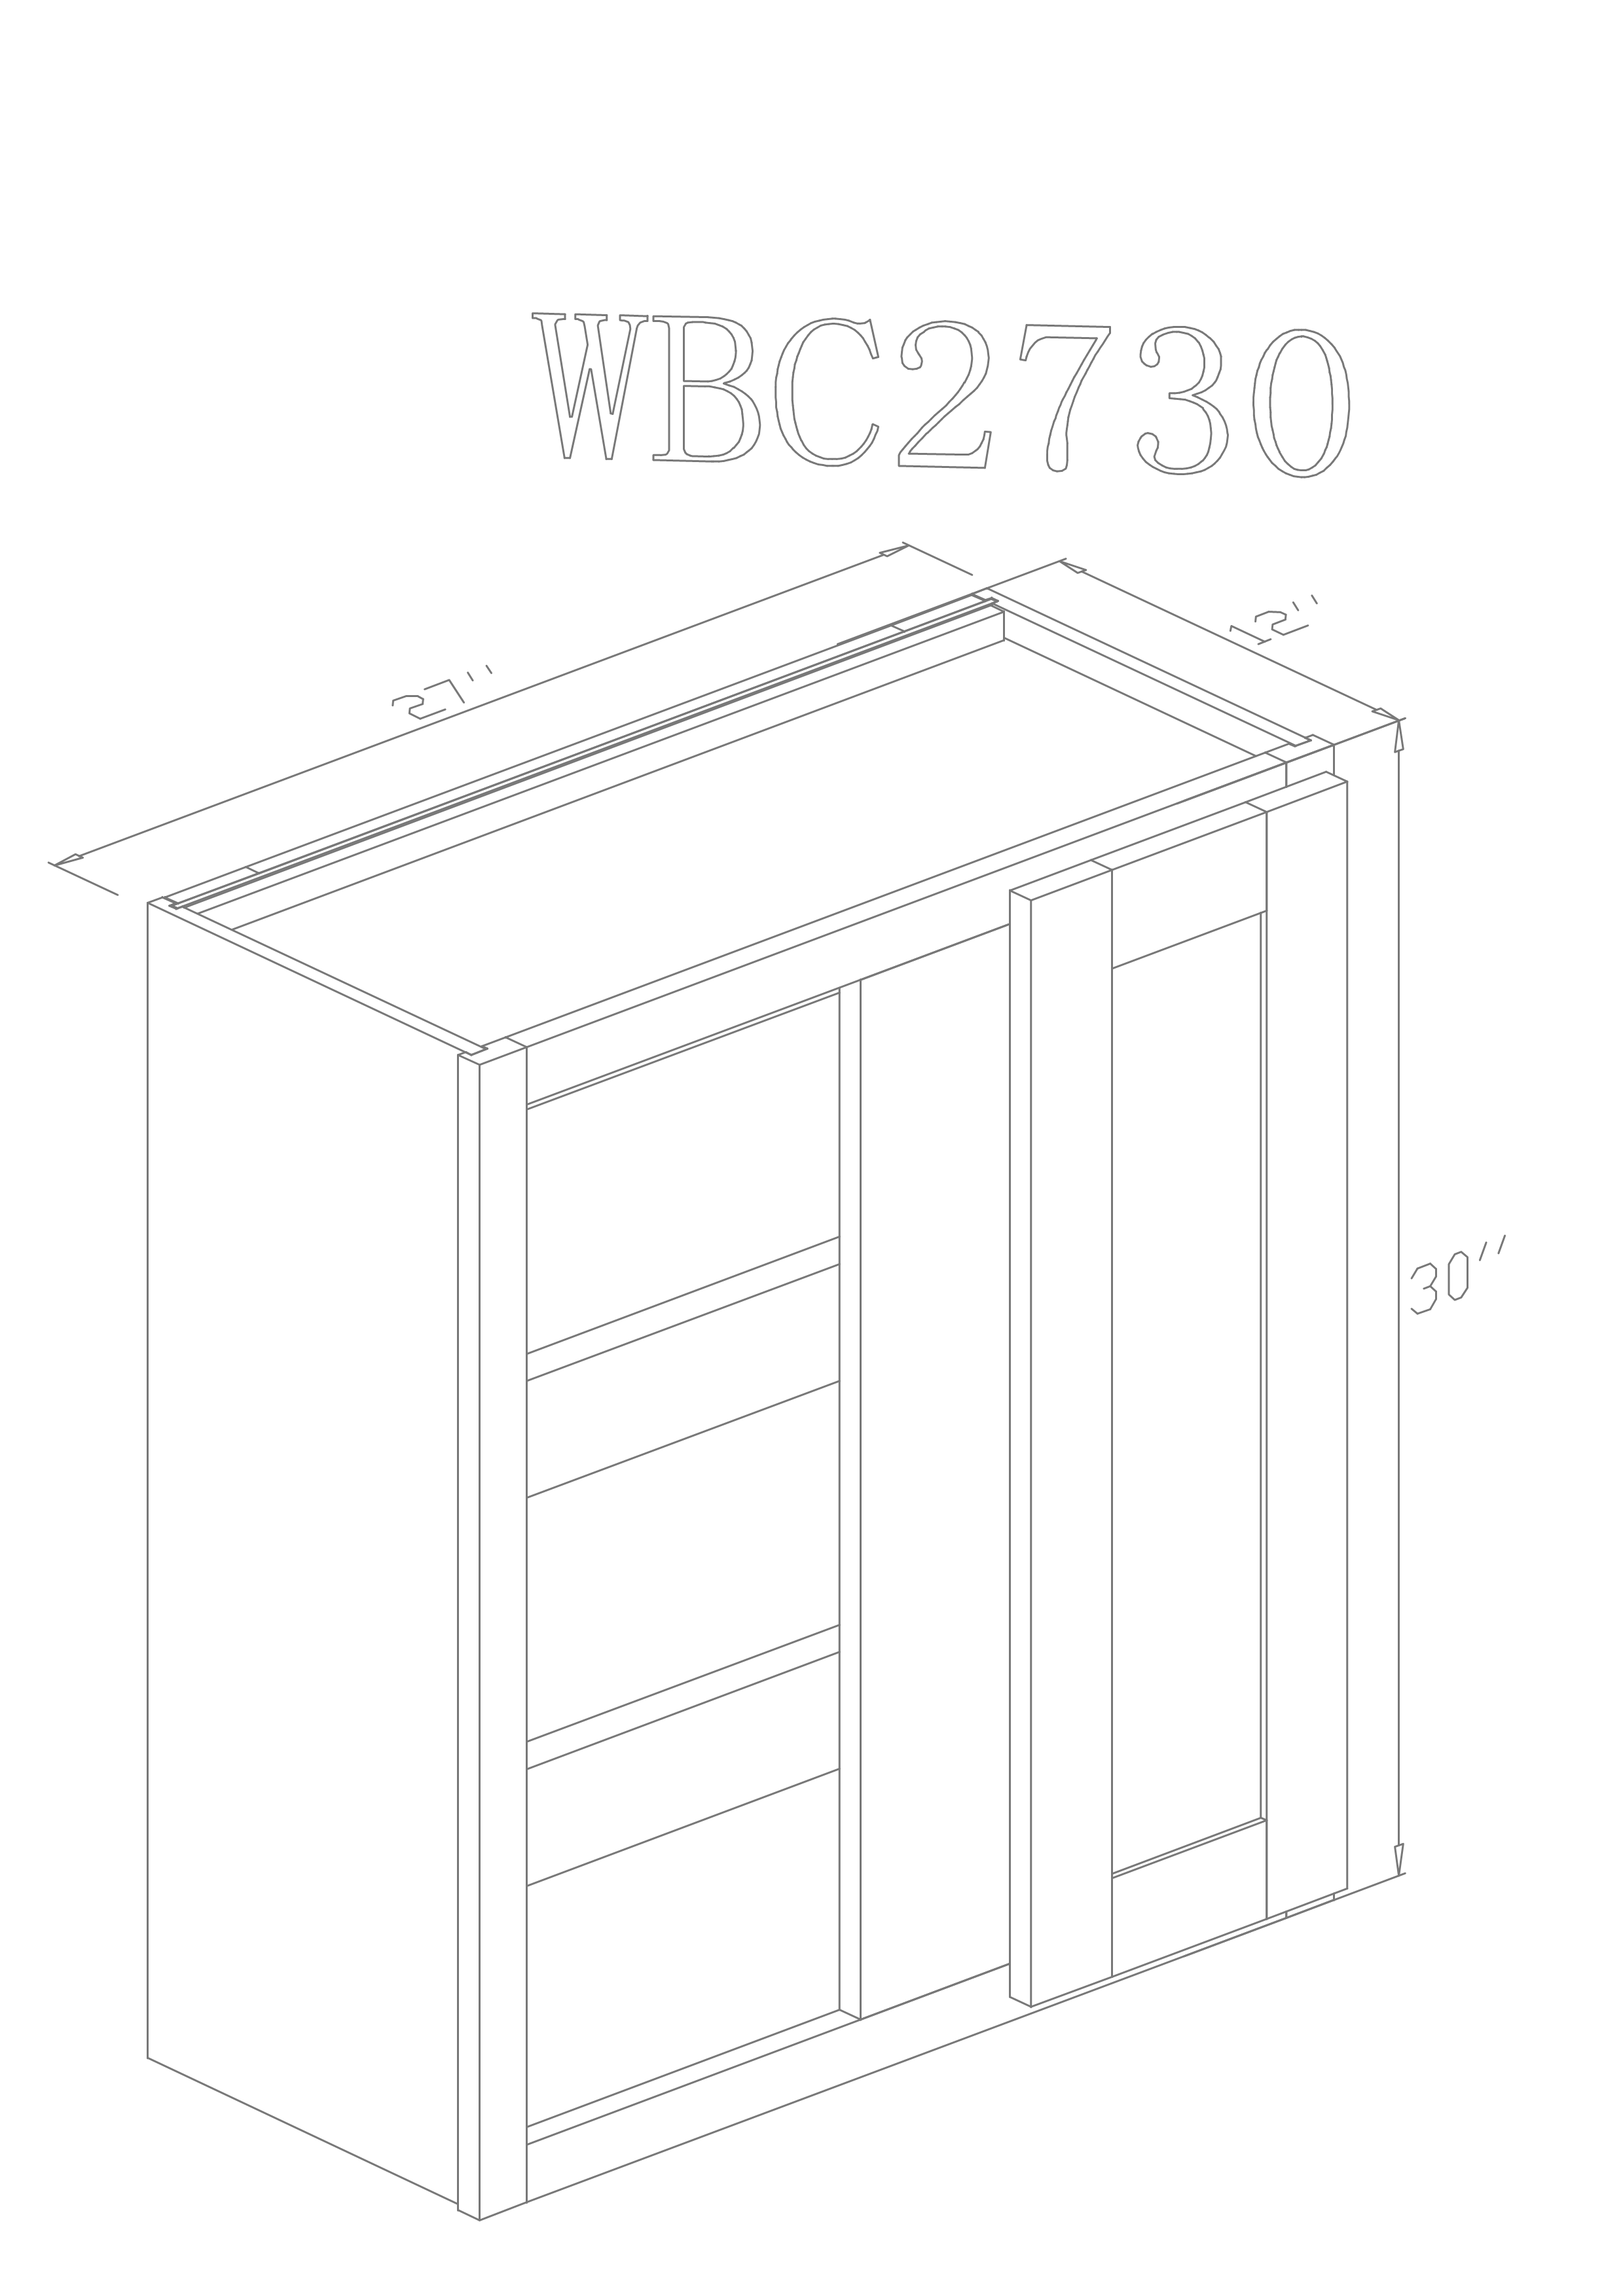 Wall 27" - Cherry 27 Inch Wall Blind Cabinet - ZCBuildingSupply